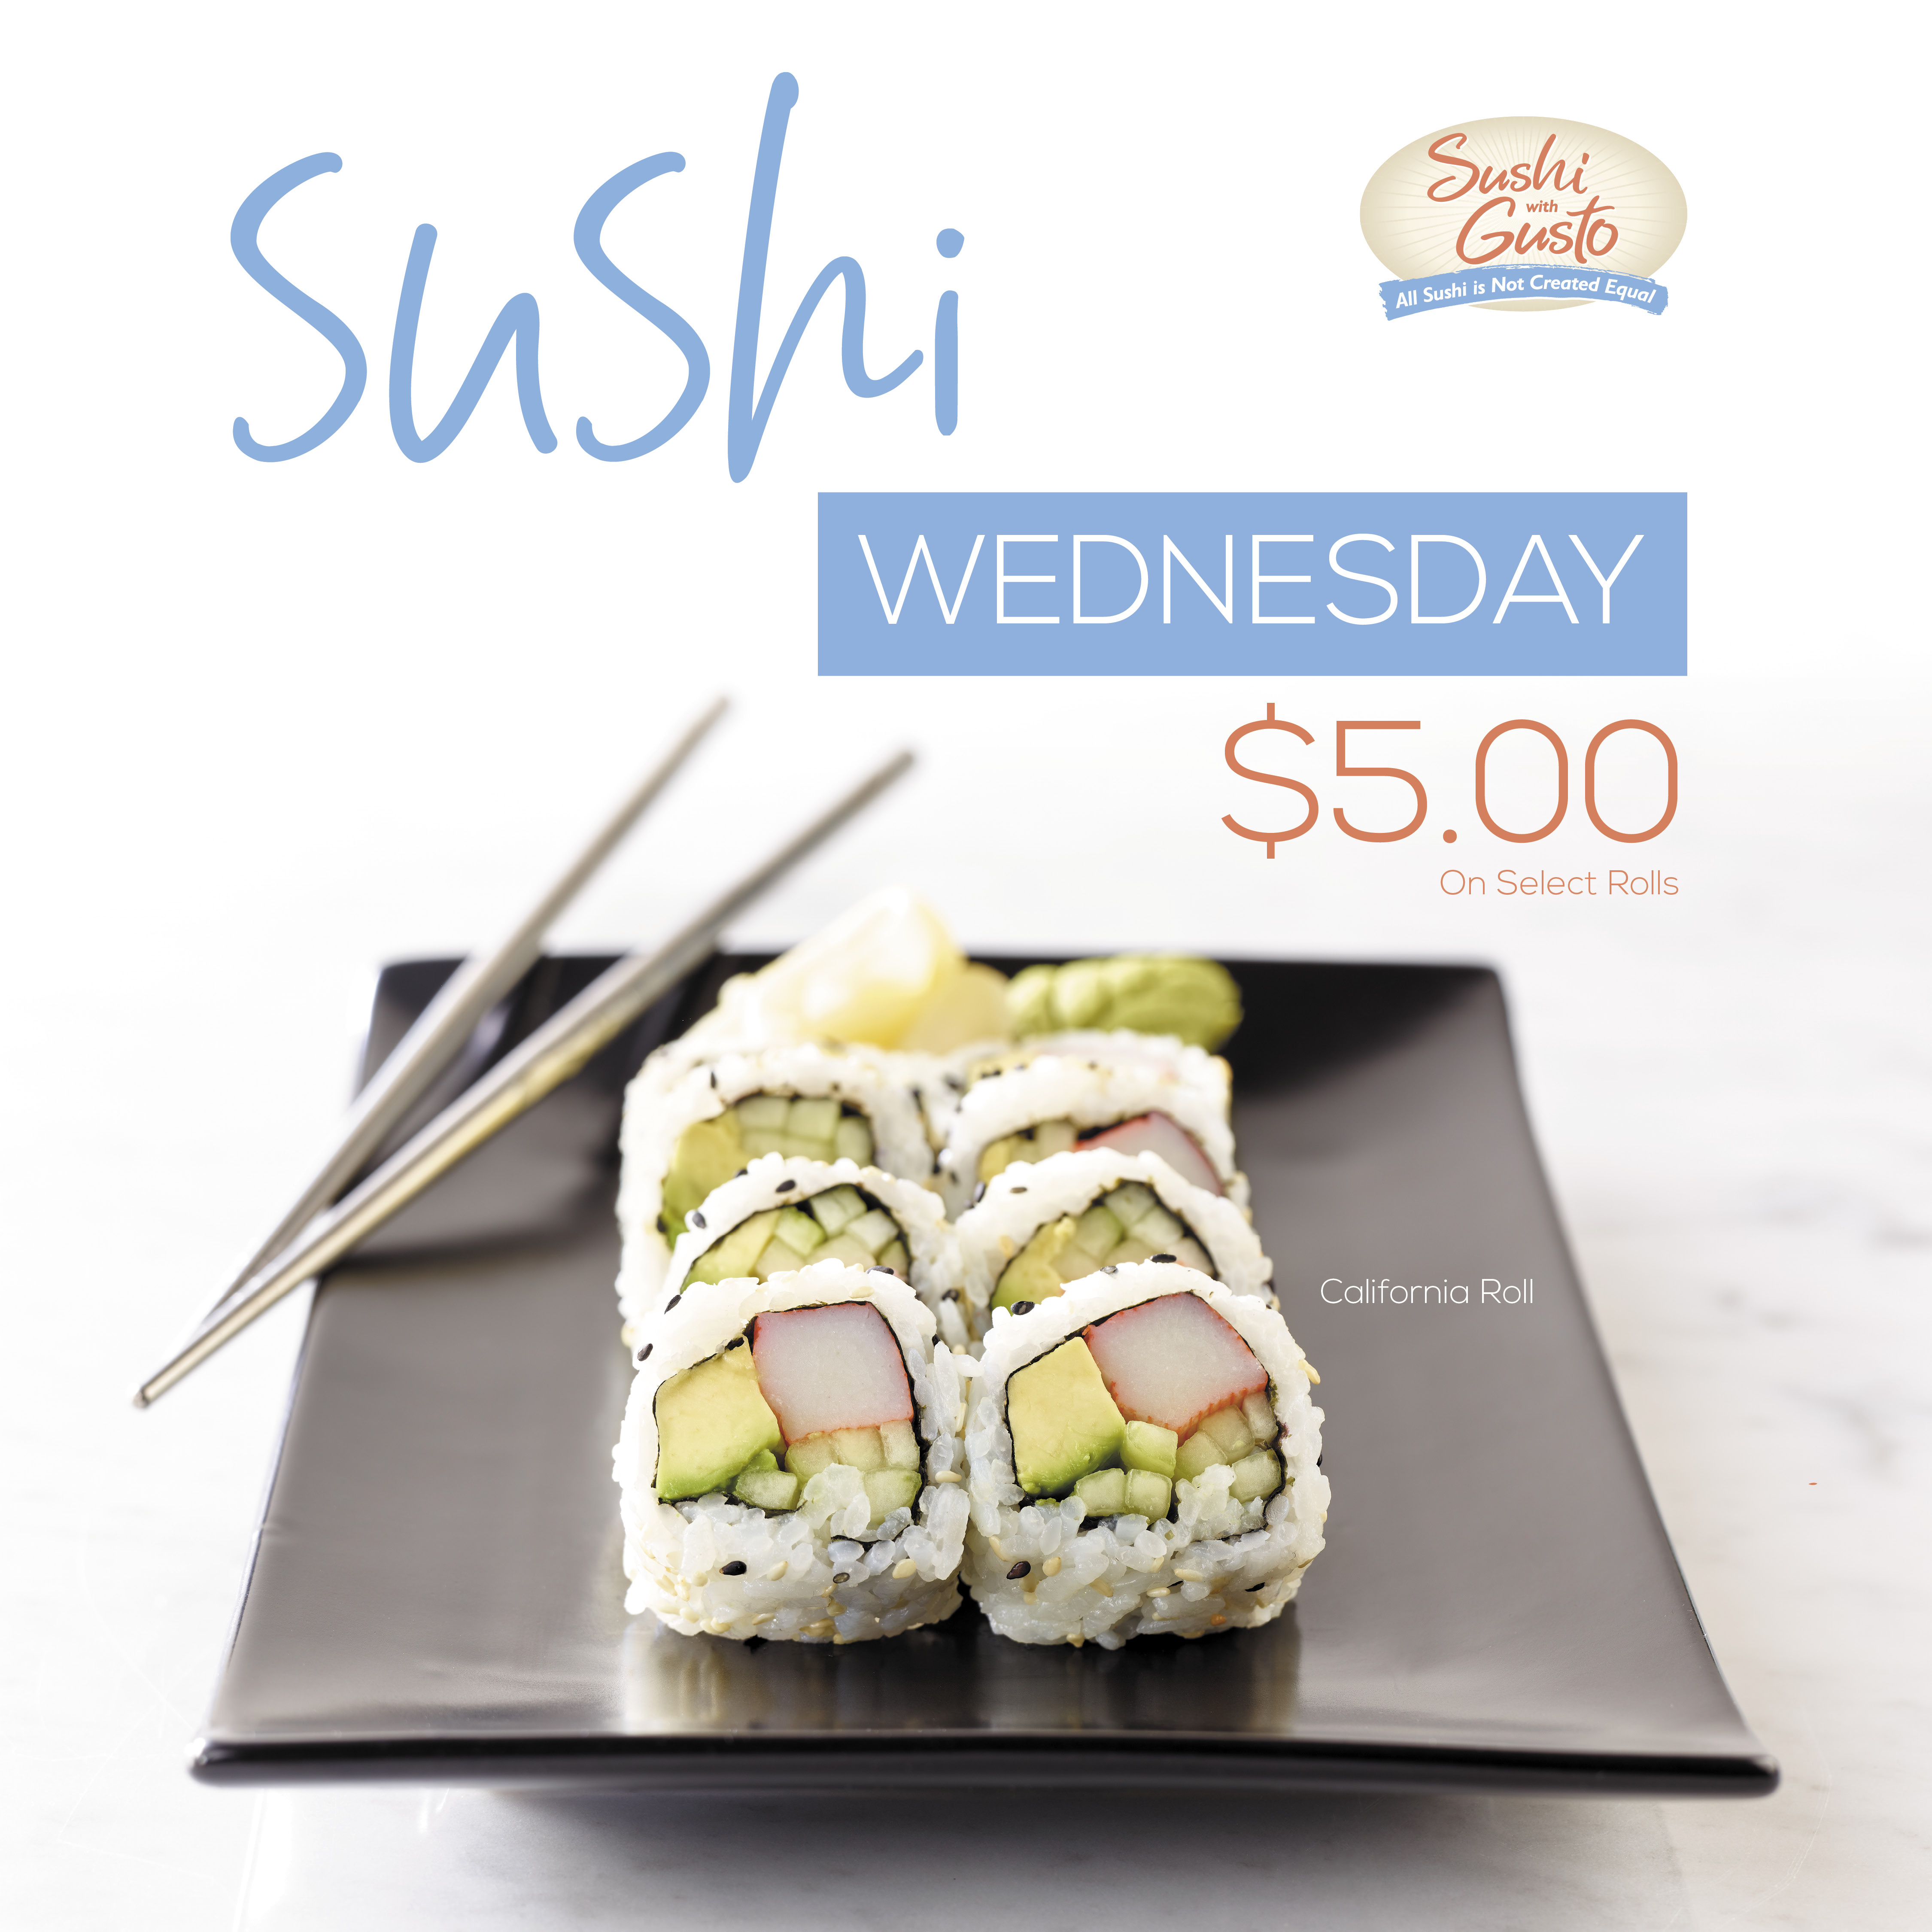 #MadeFreshDaily - Sushi With Gusto!